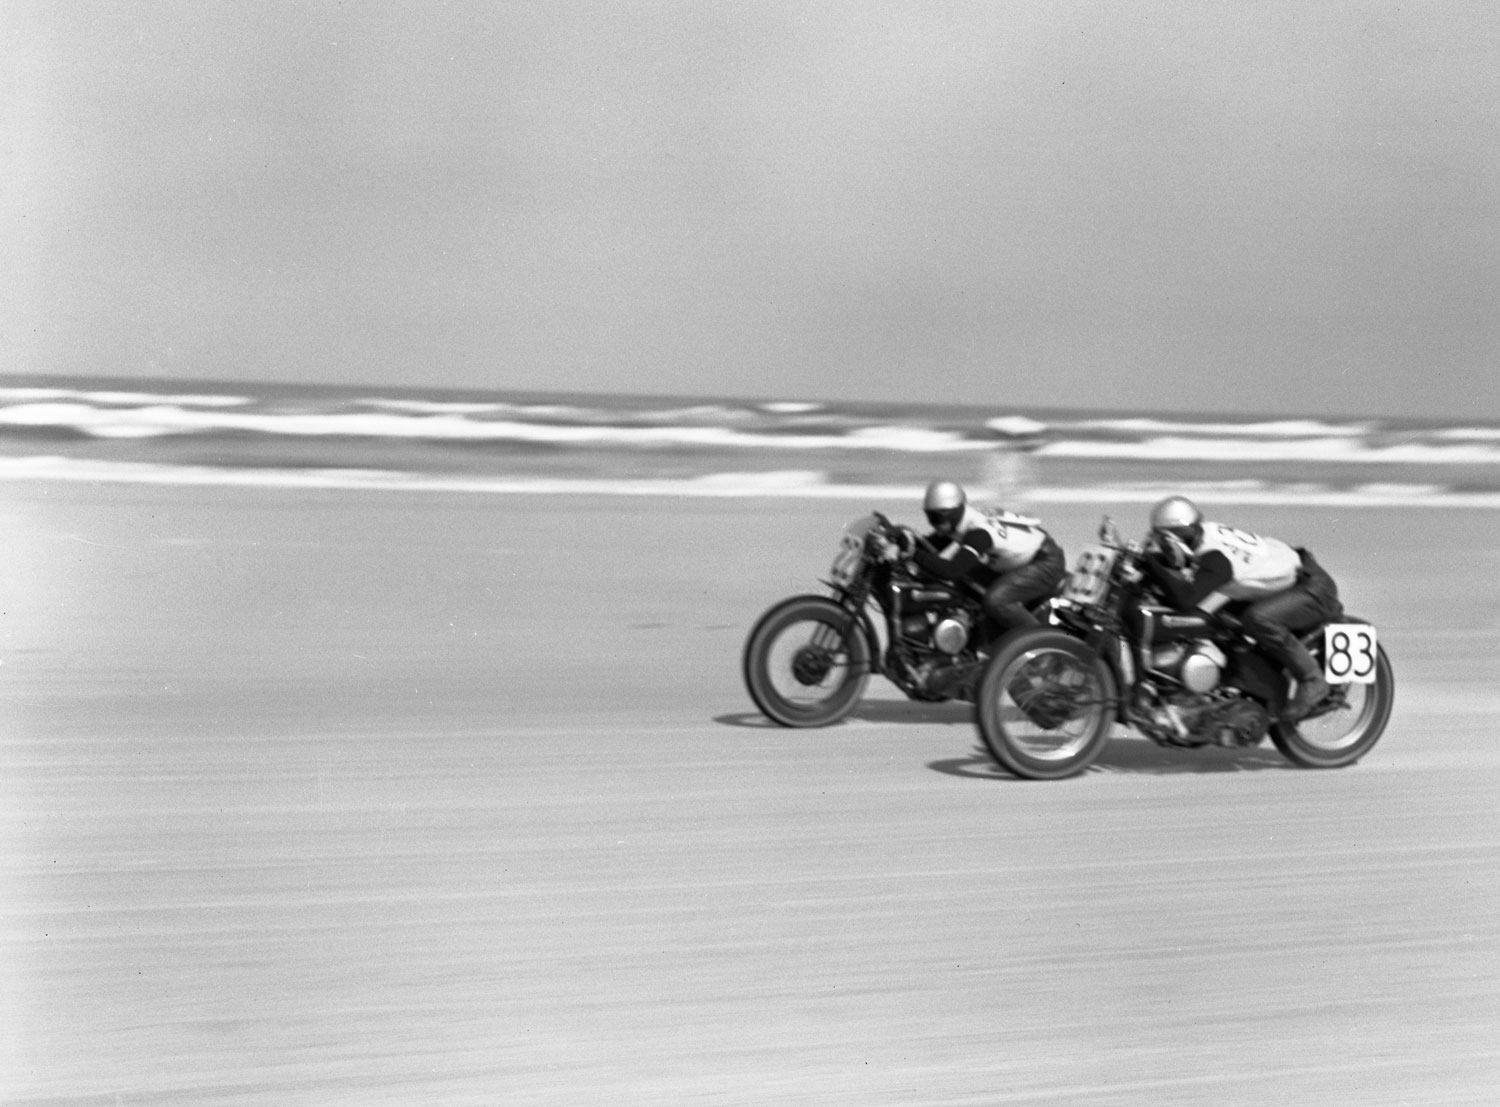 Low on their bikes, two racers speed neck and neck across the sand during the Daytona 200, Daytona Beach, Florida, in March 1948.